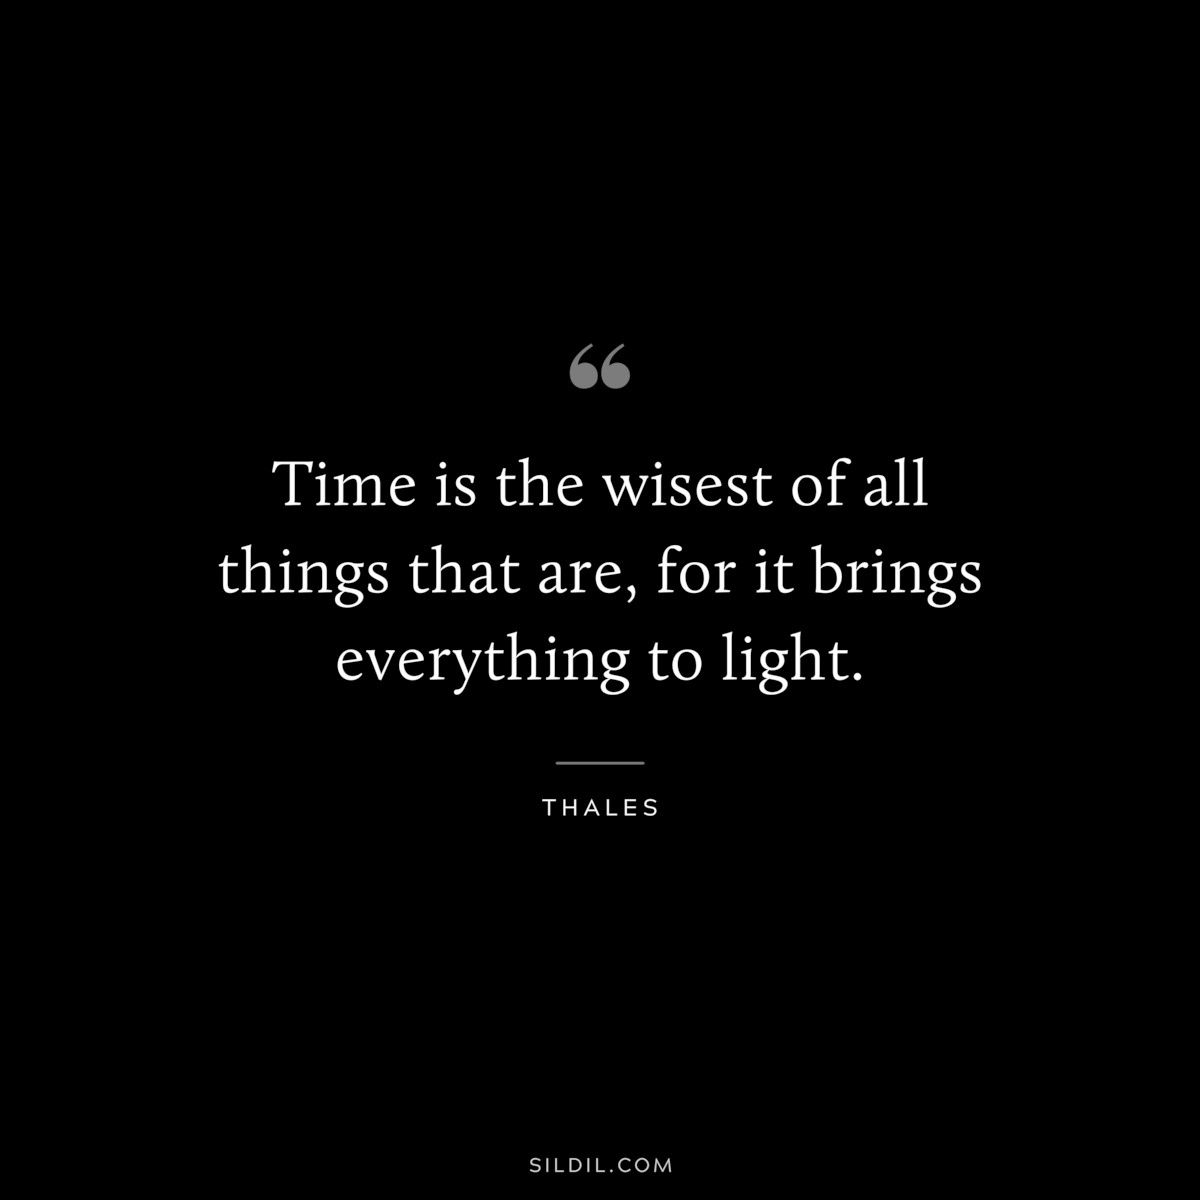 Time is the wisest of all things that are, for it brings everything to light. ― Thales